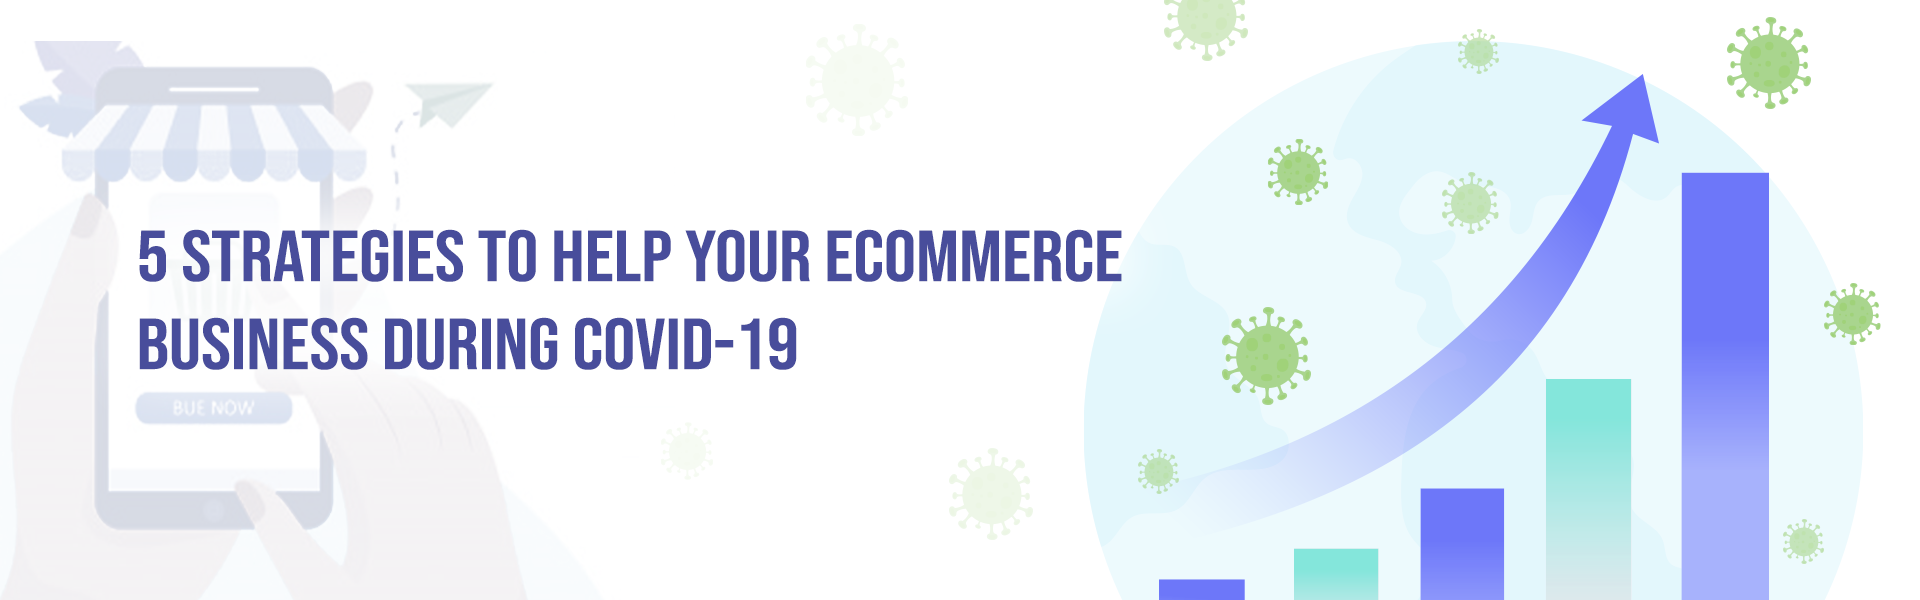 5 Strategies to Help Your Ecommerce Business During COVID-19